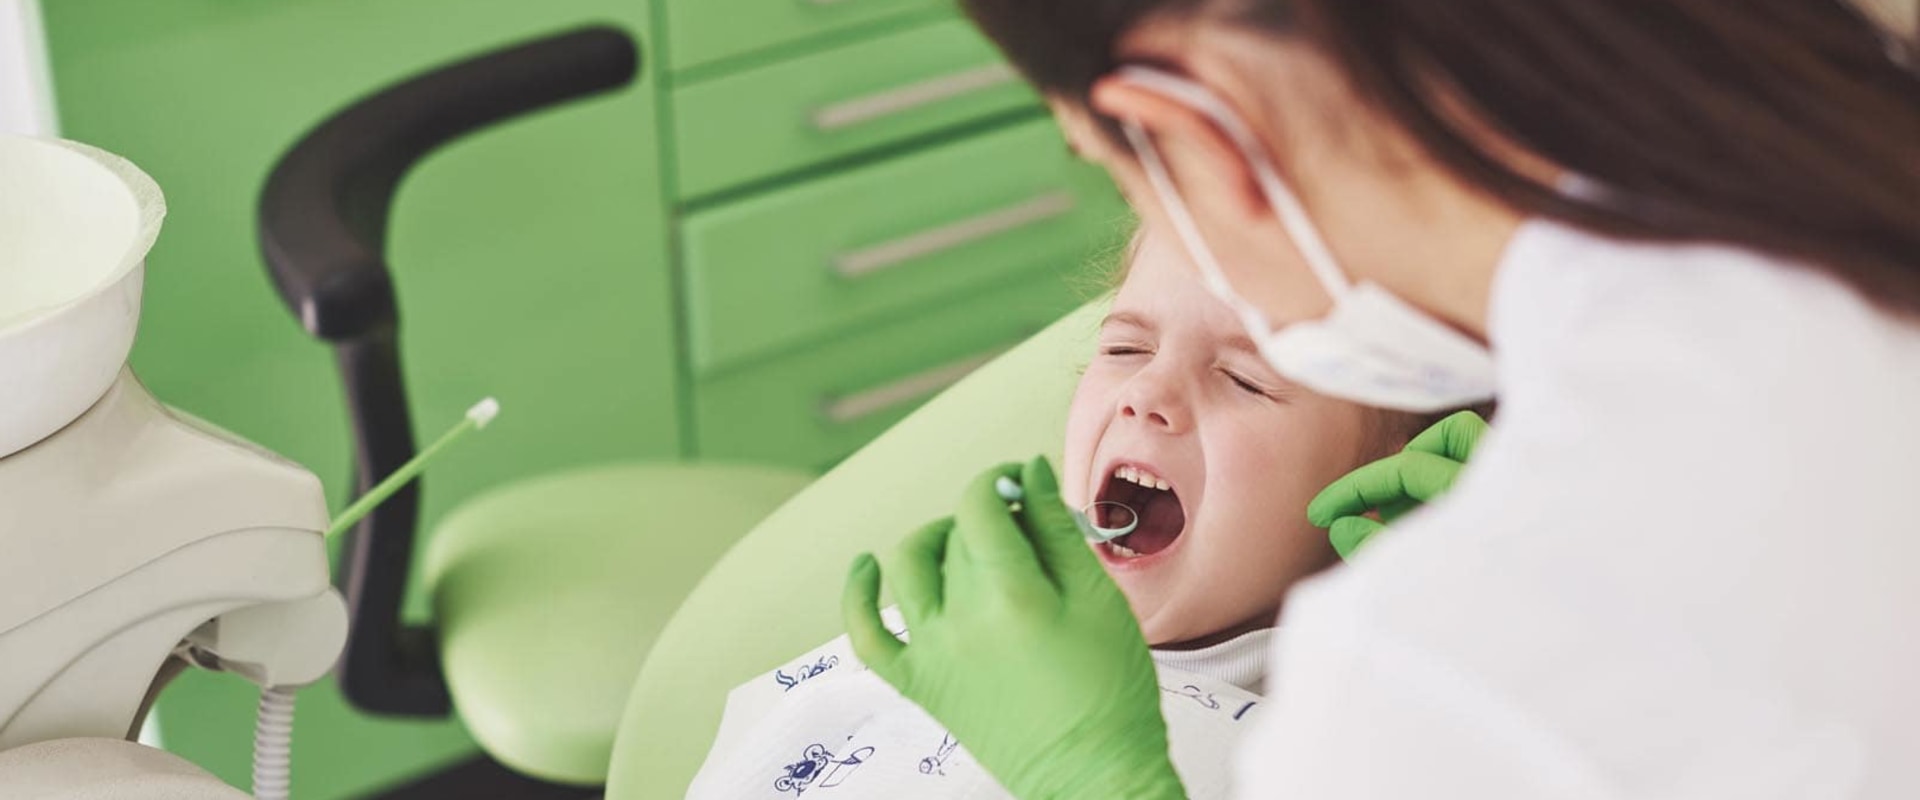 Why is pediatric dentistry interesting?